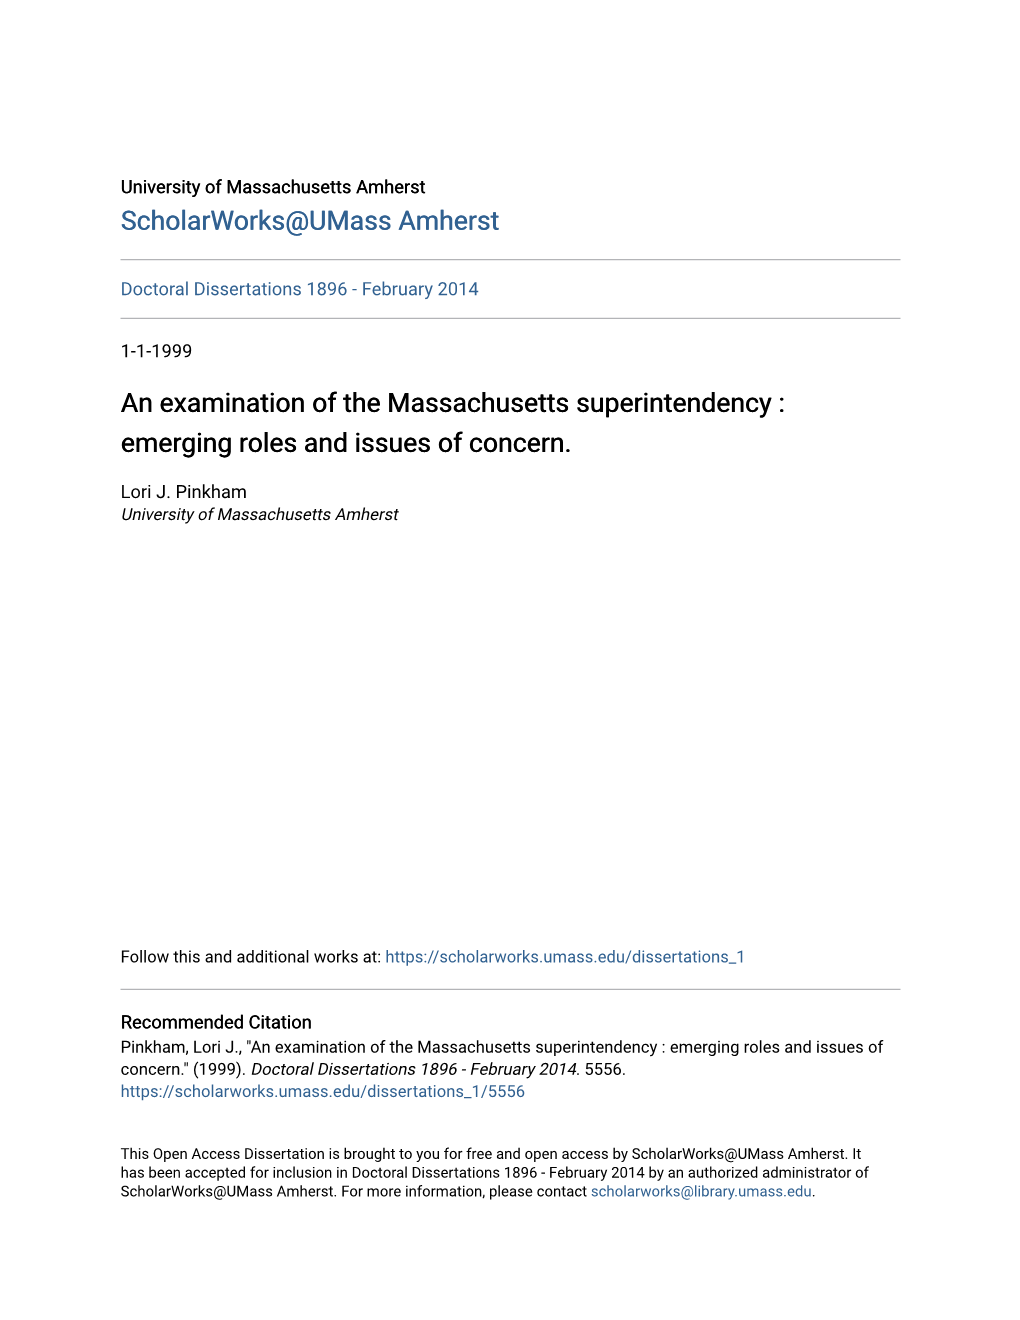 An Examination of the Massachusetts Superintendency : Emerging Roles and Issues of Concern